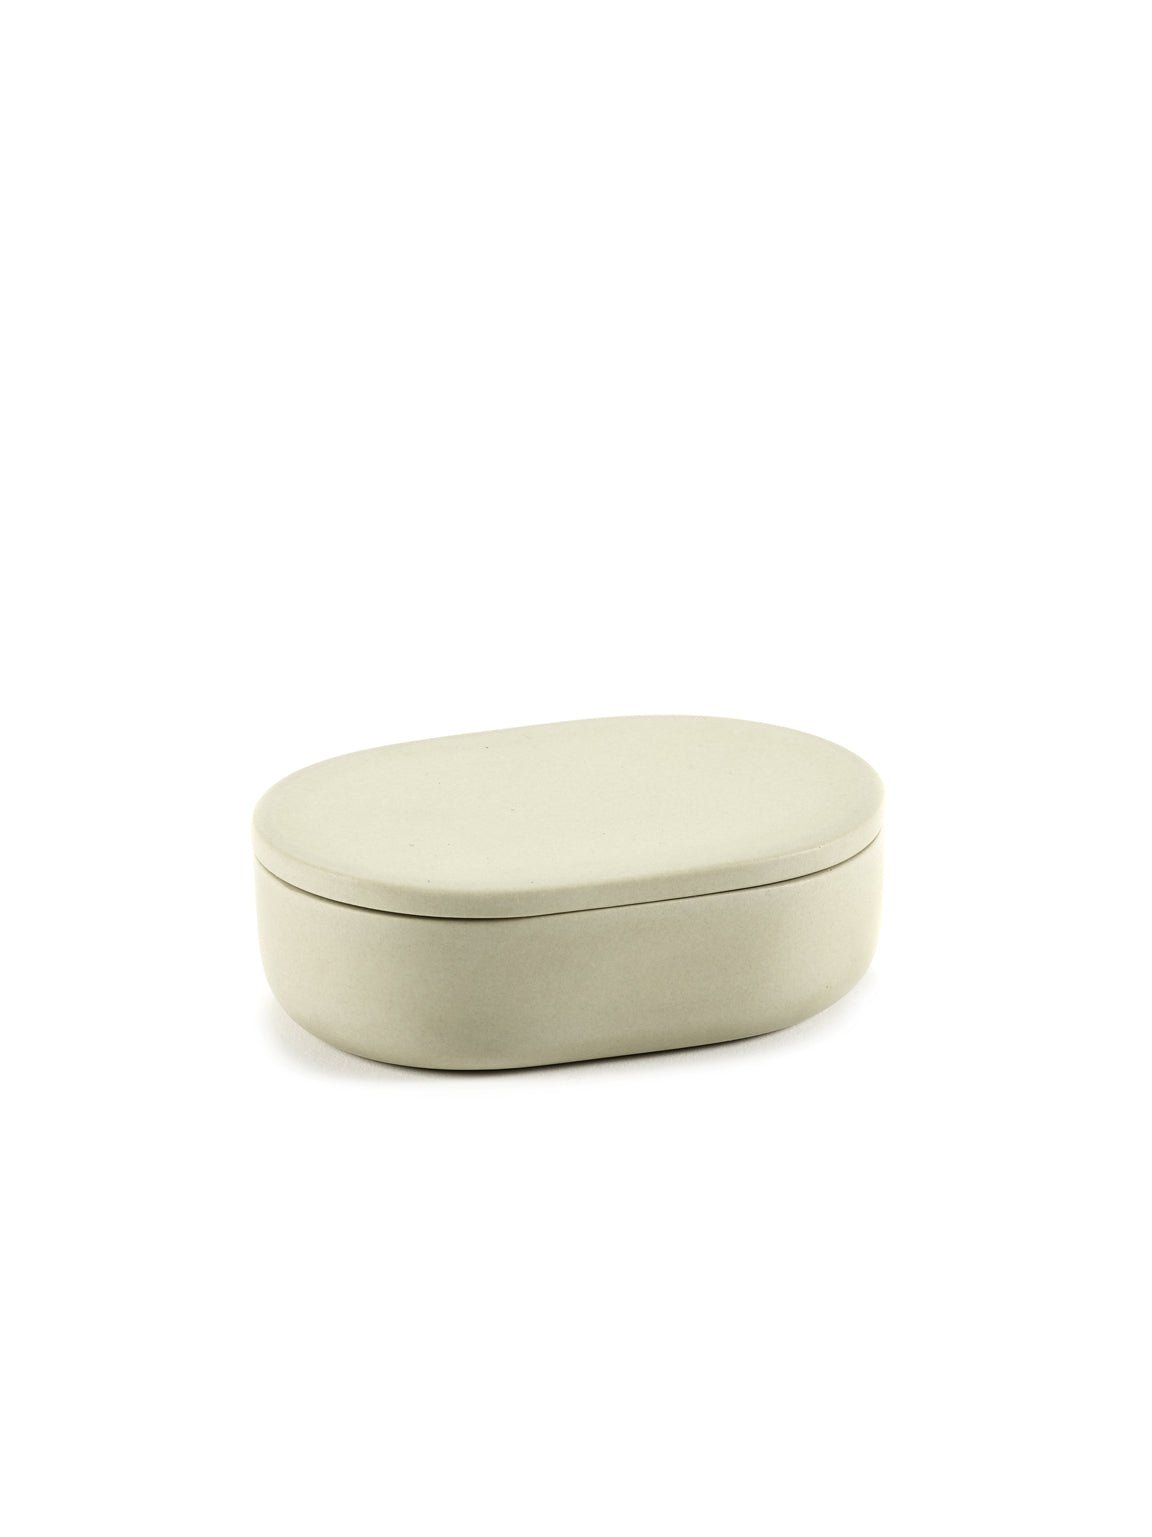 Cose Oval Box with Lid